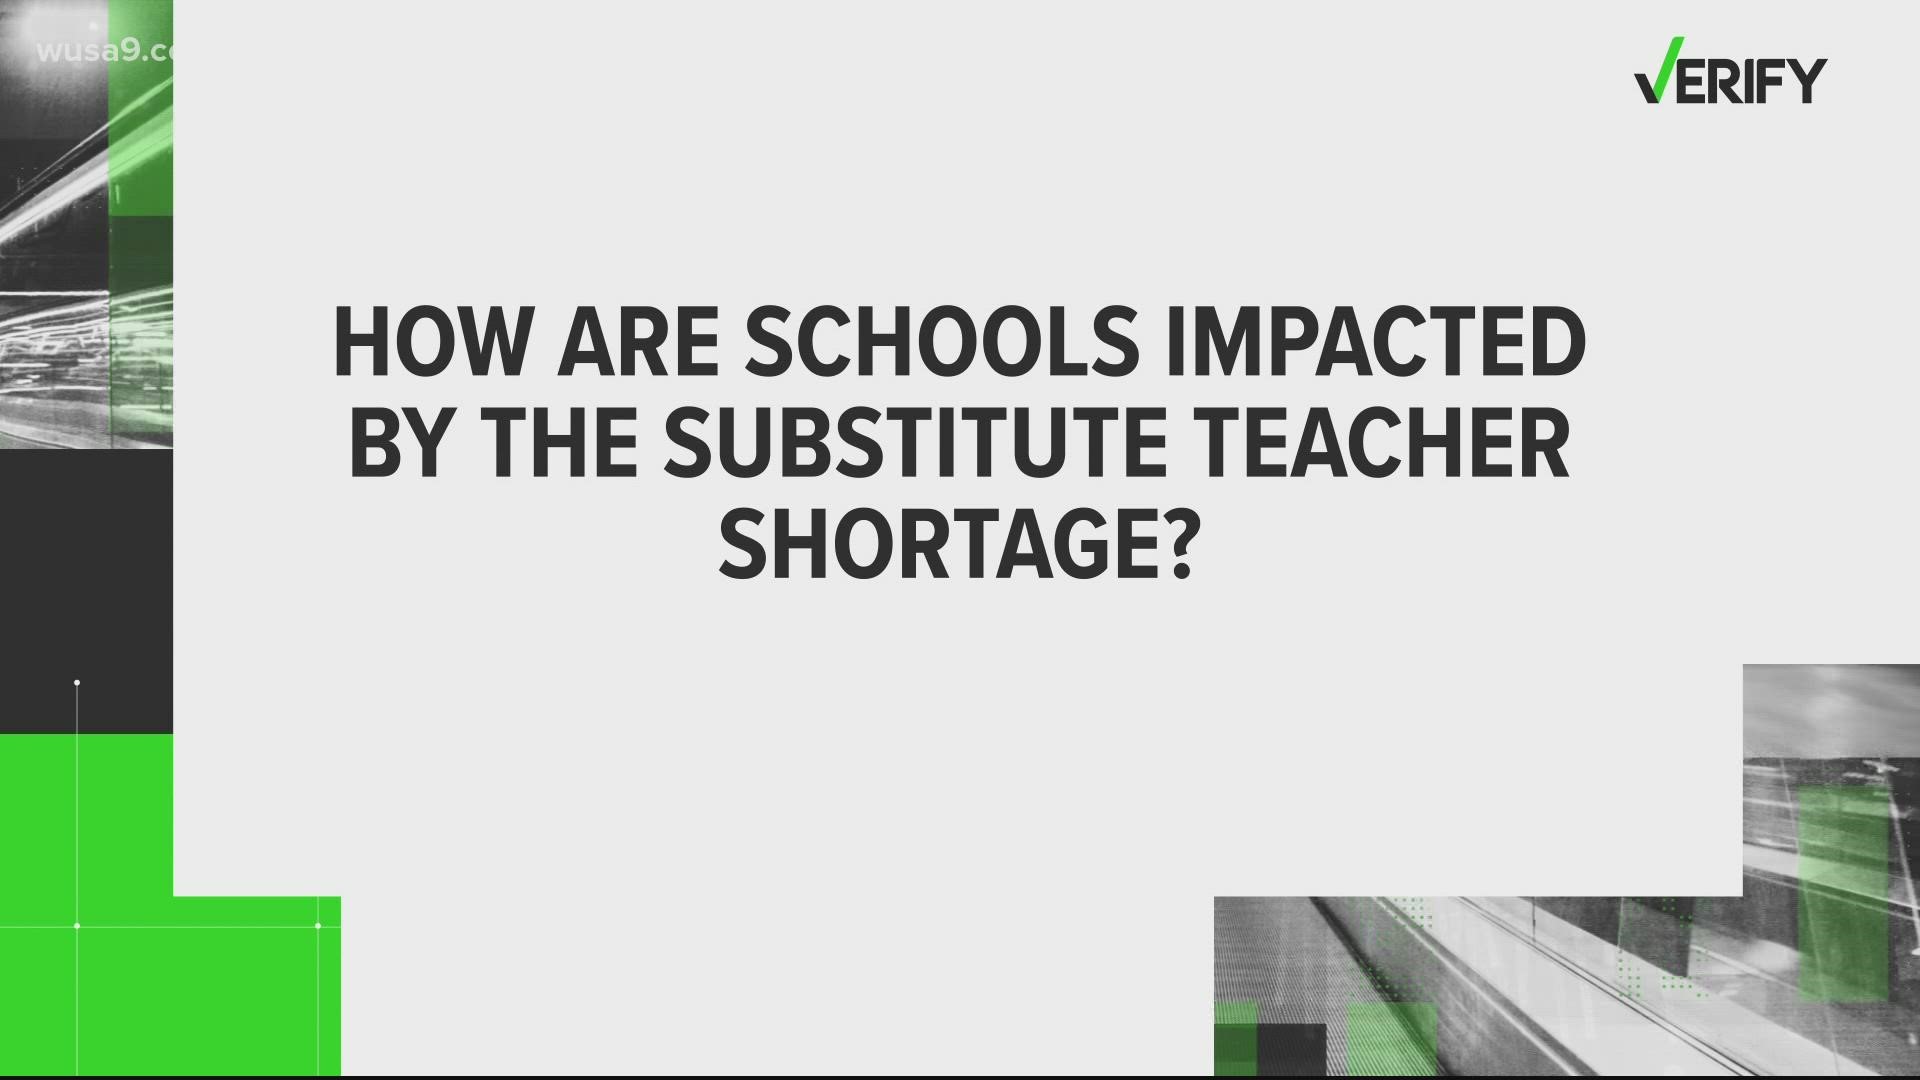 The shortage has left school systems scrambling to fill classes.